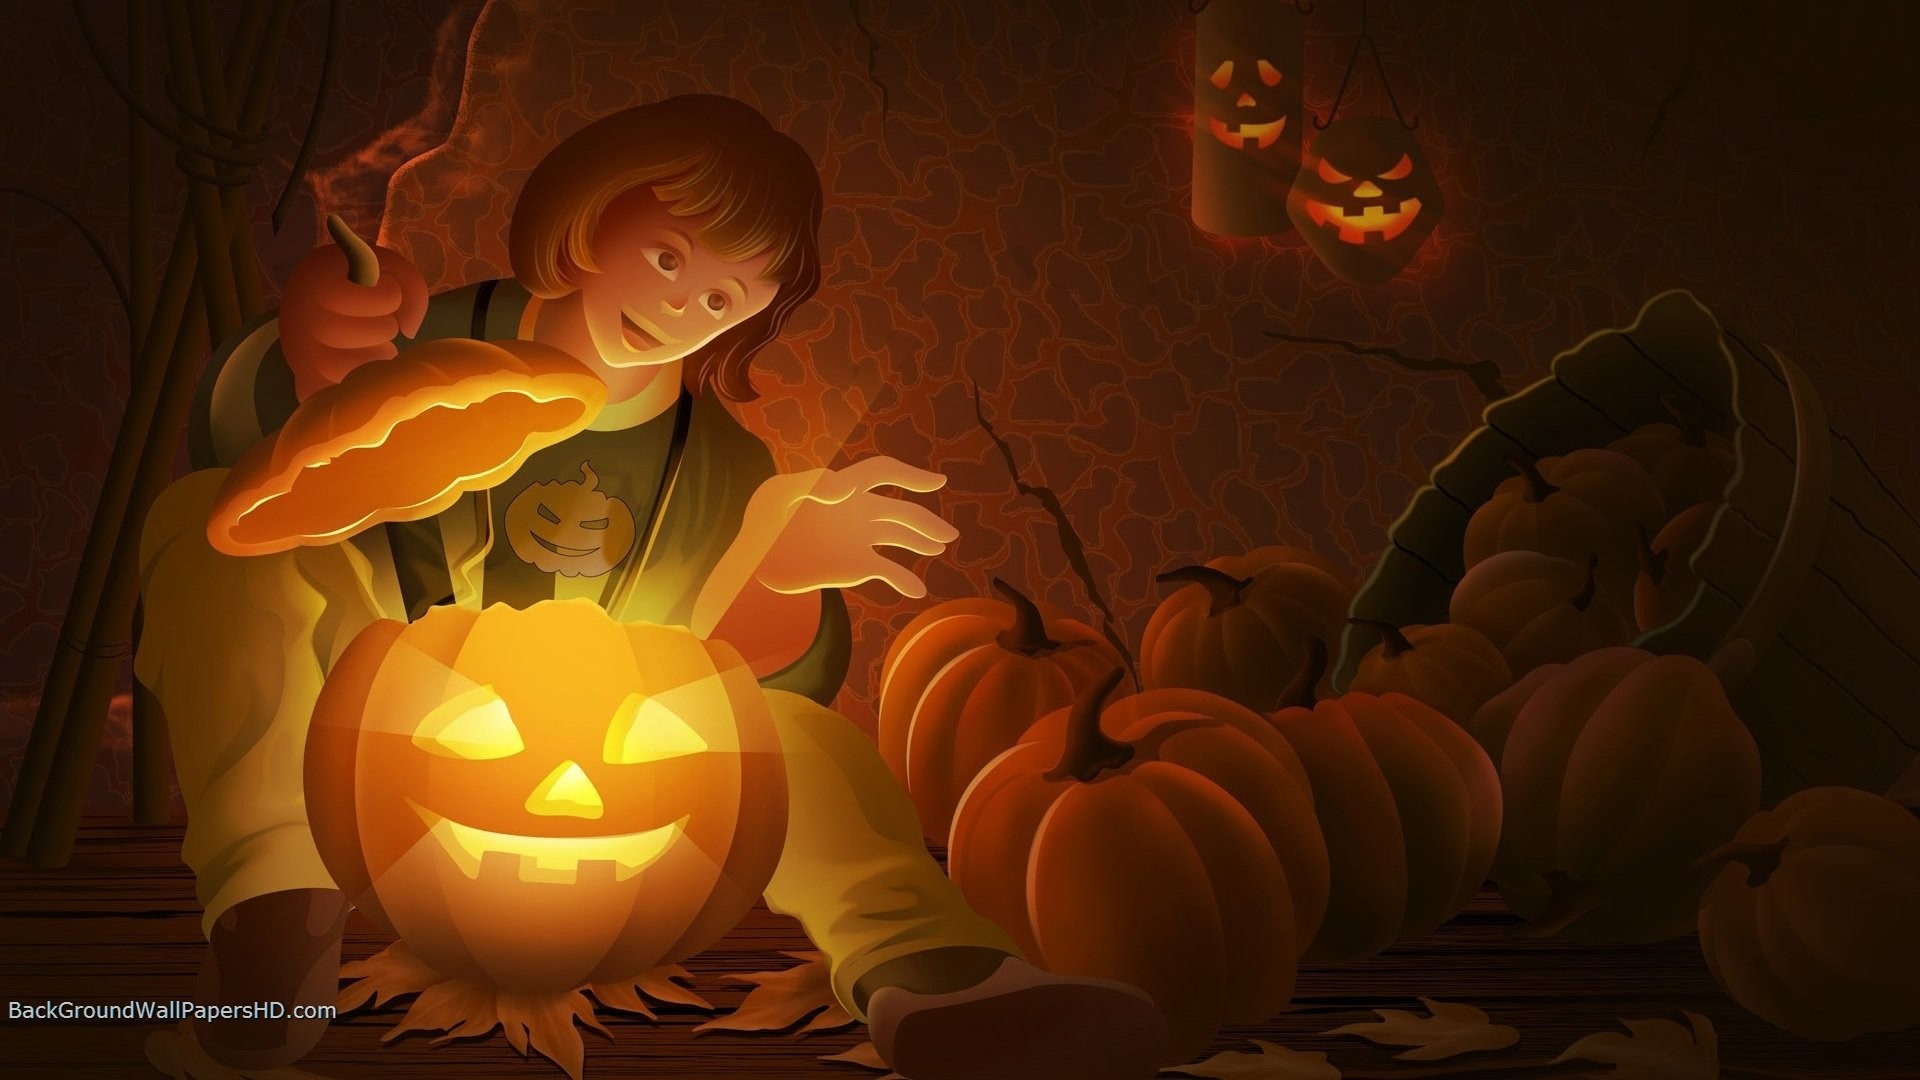 1920x1080 Halloween Background Animated - WallDevil. Halloween Background Animated  WallDevil